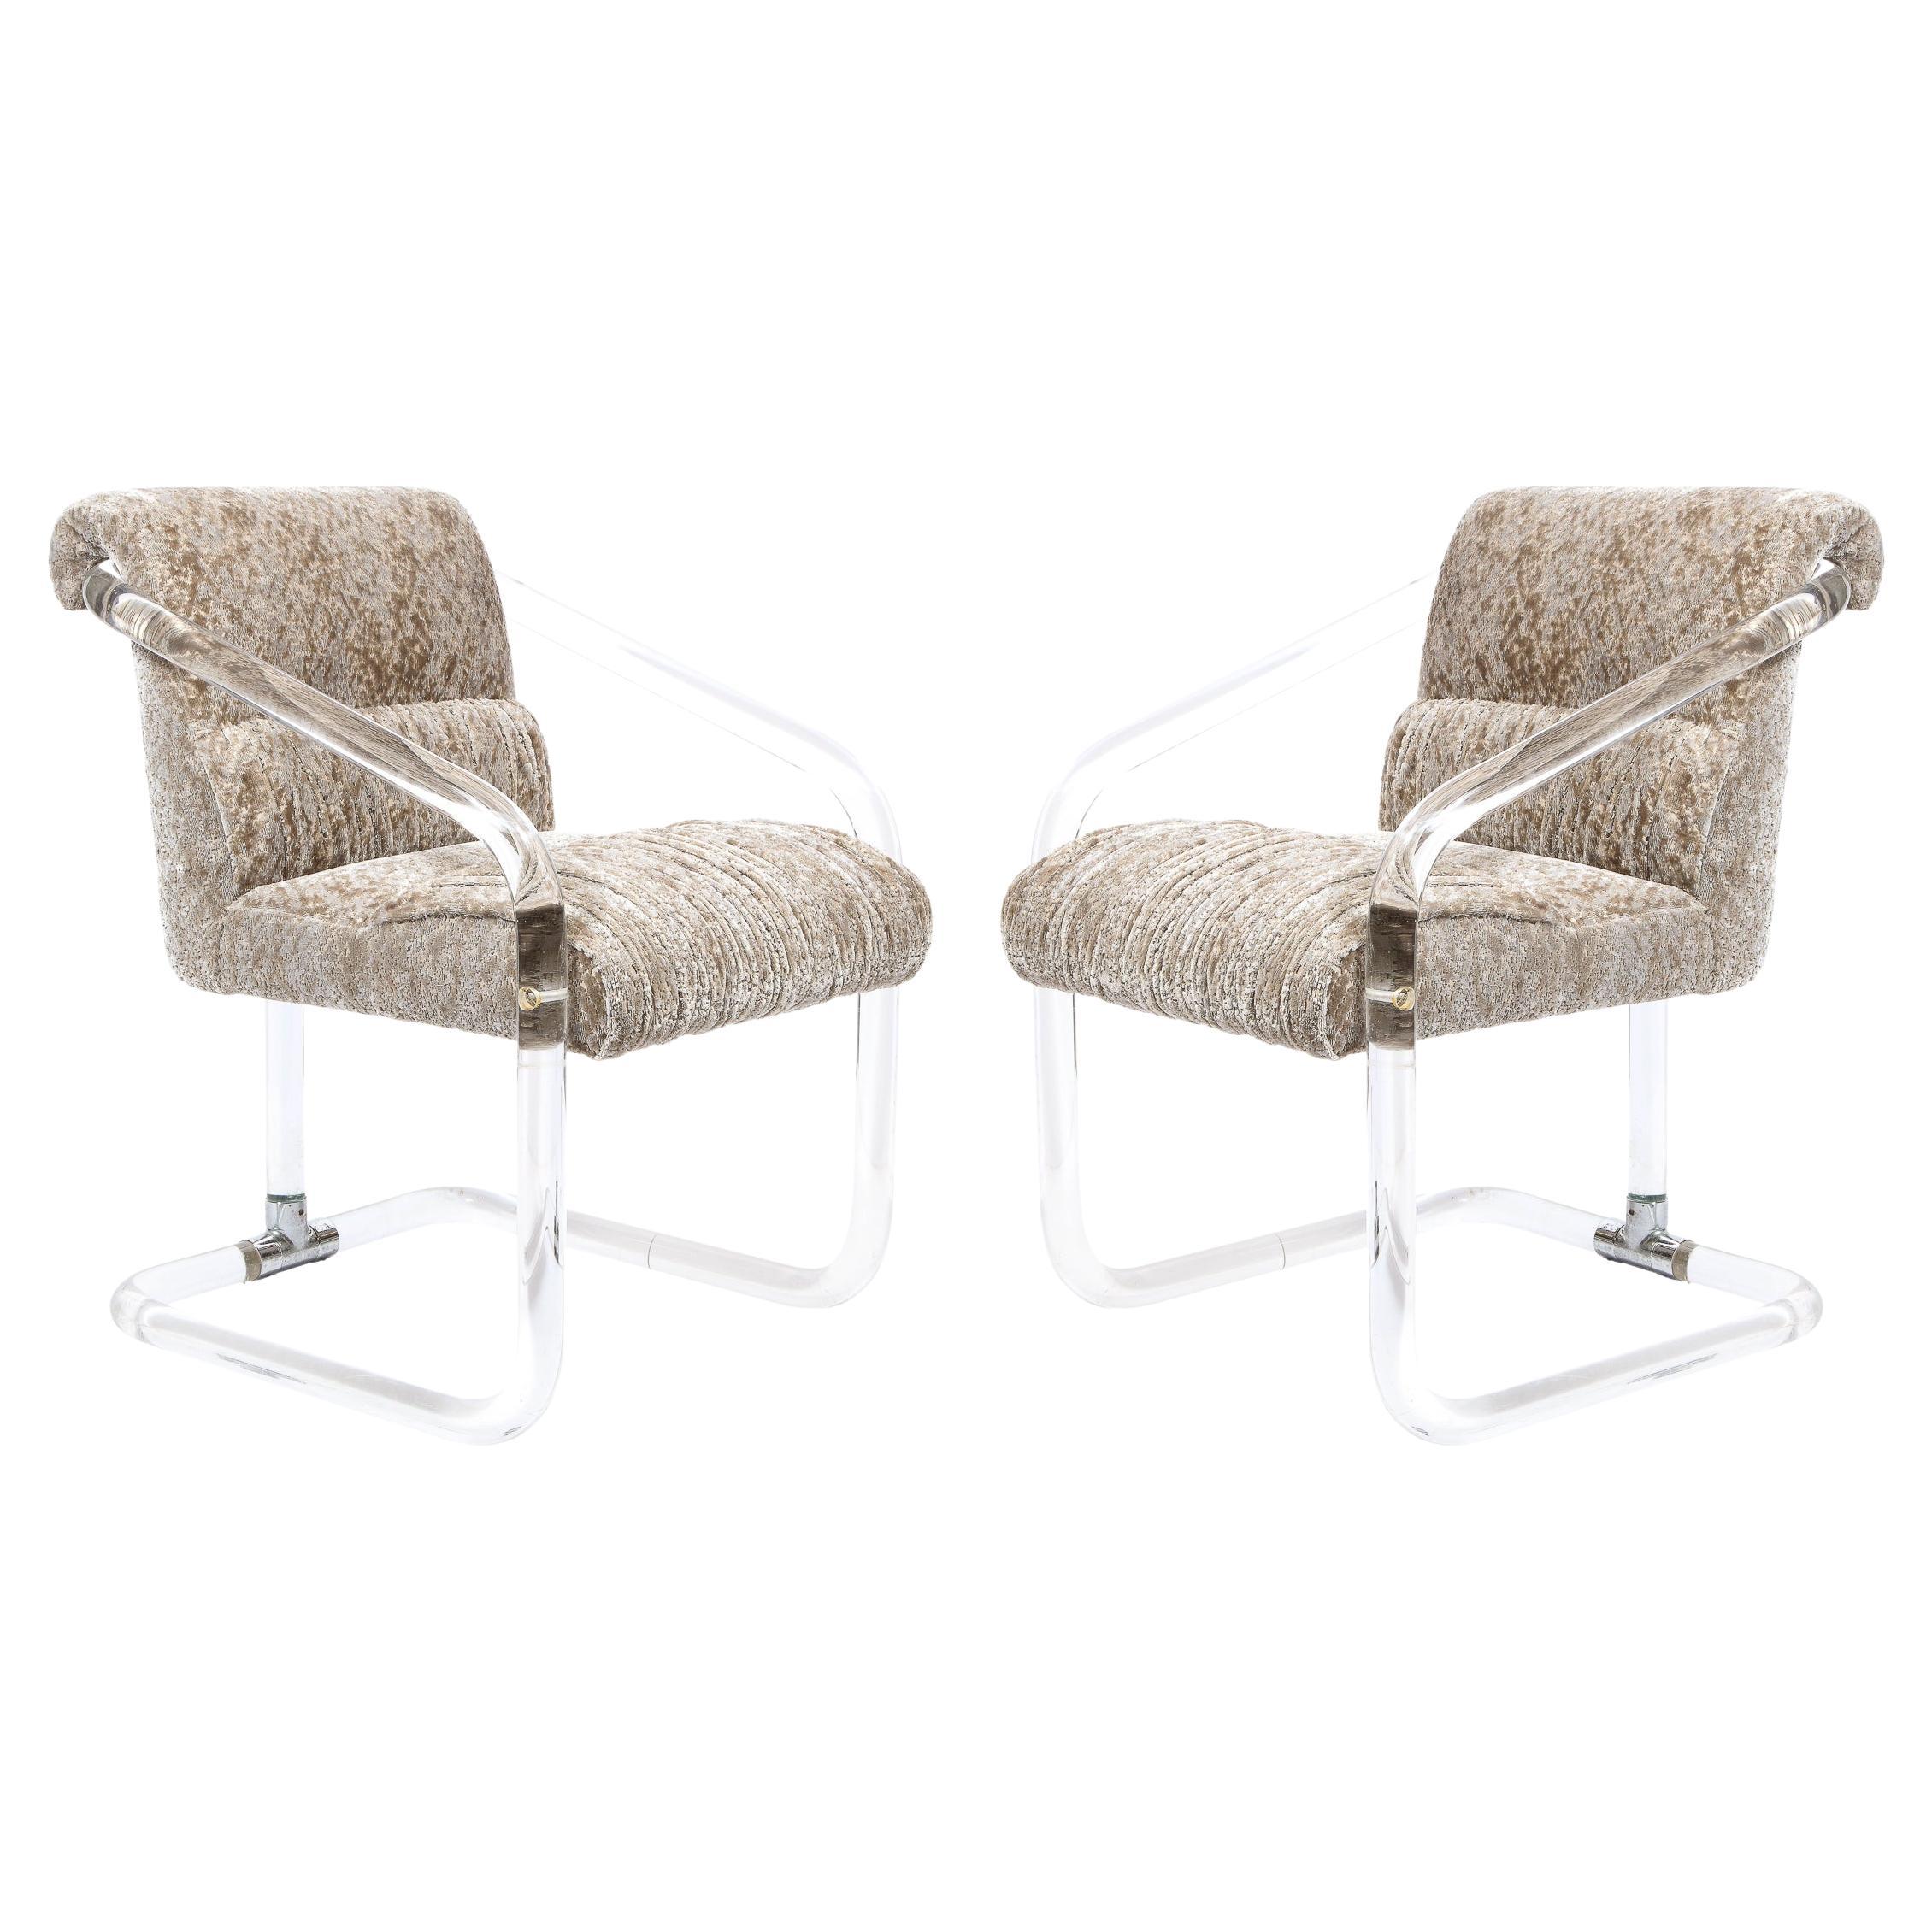 Pair of Mid-Century Modern Pipe Line Chairs in Lucite by Jeff Messerschmidt